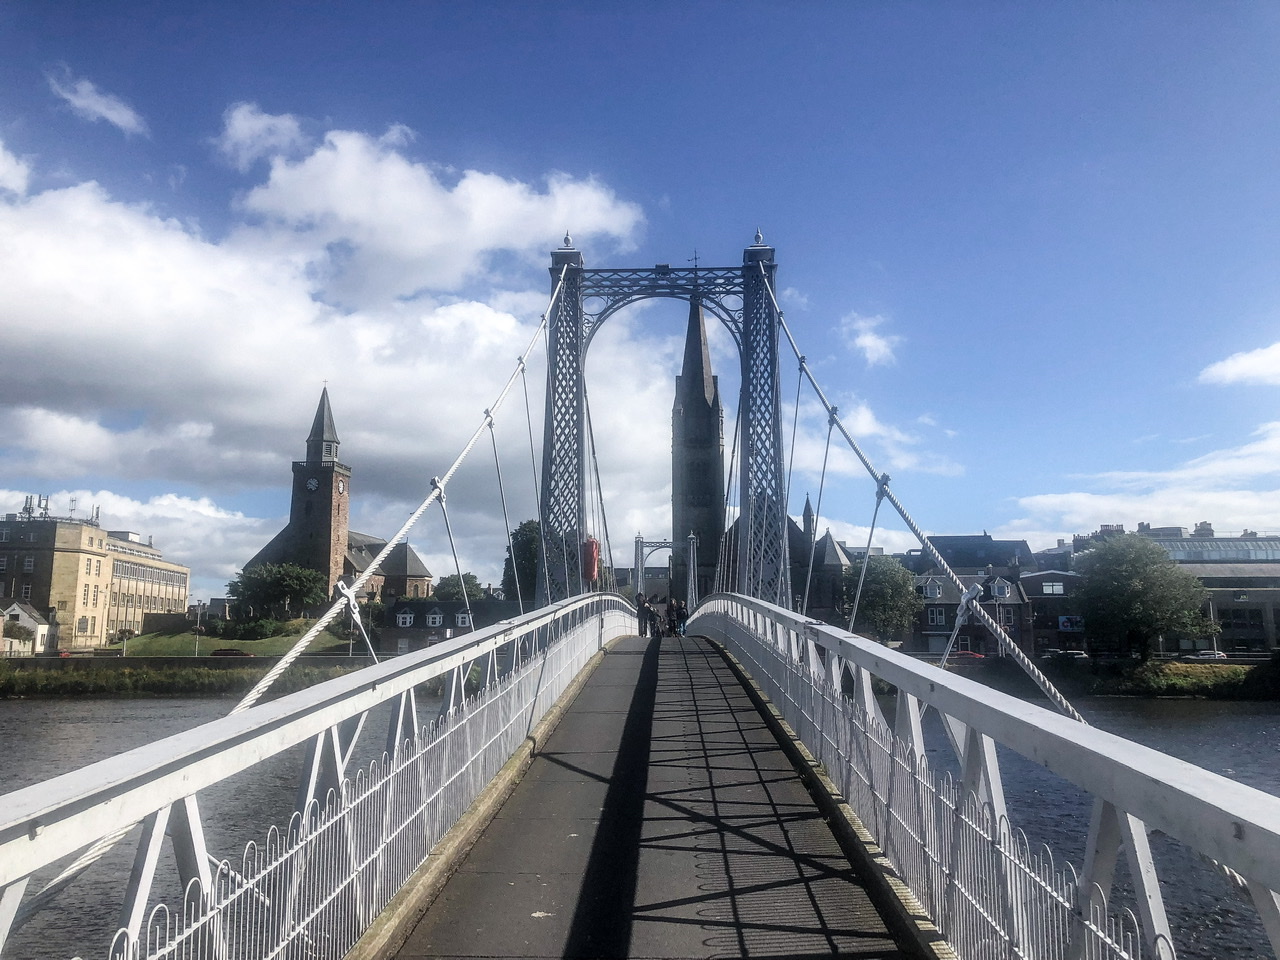 white pedestrian footbridge over a river with church spires visible on far side